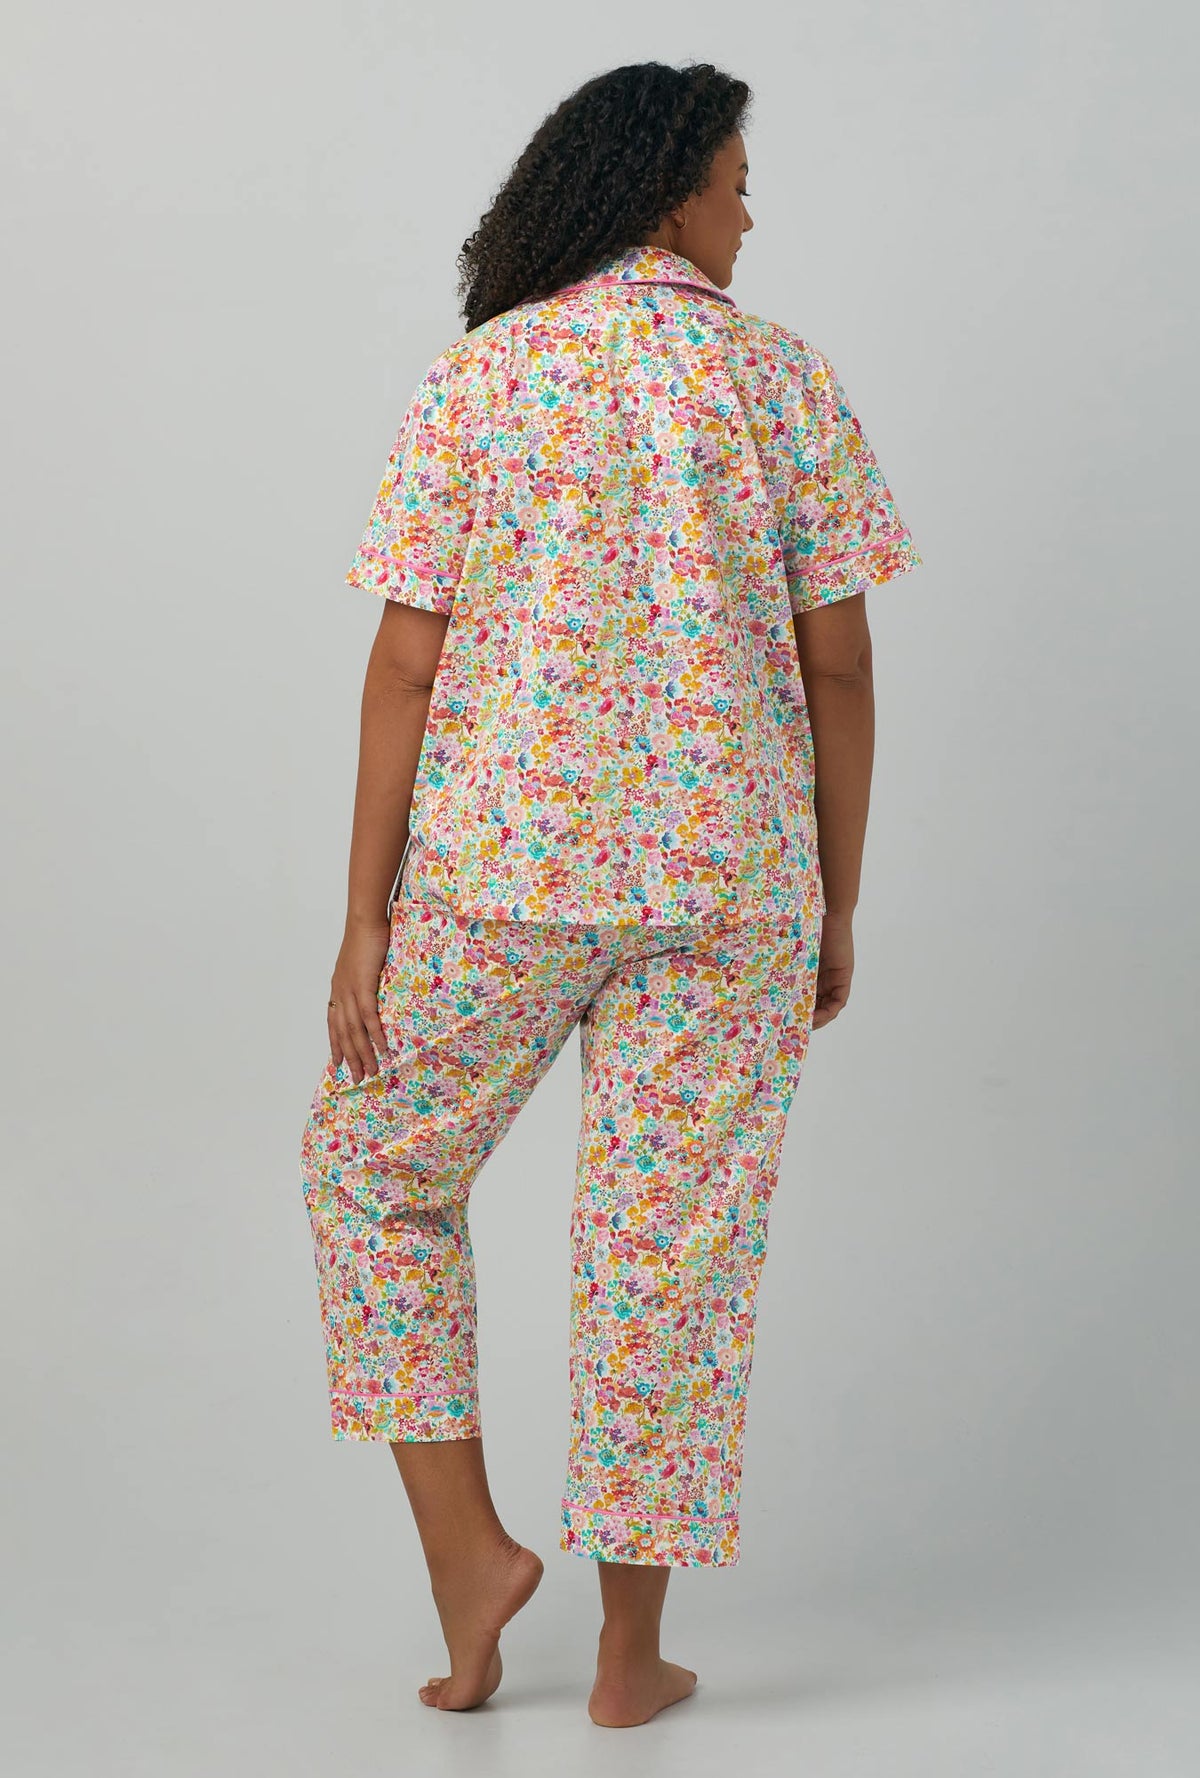 A lady wearing multi color plus size short Sleeve Classic Woven Cotton PJ Set with Classic Meadow print